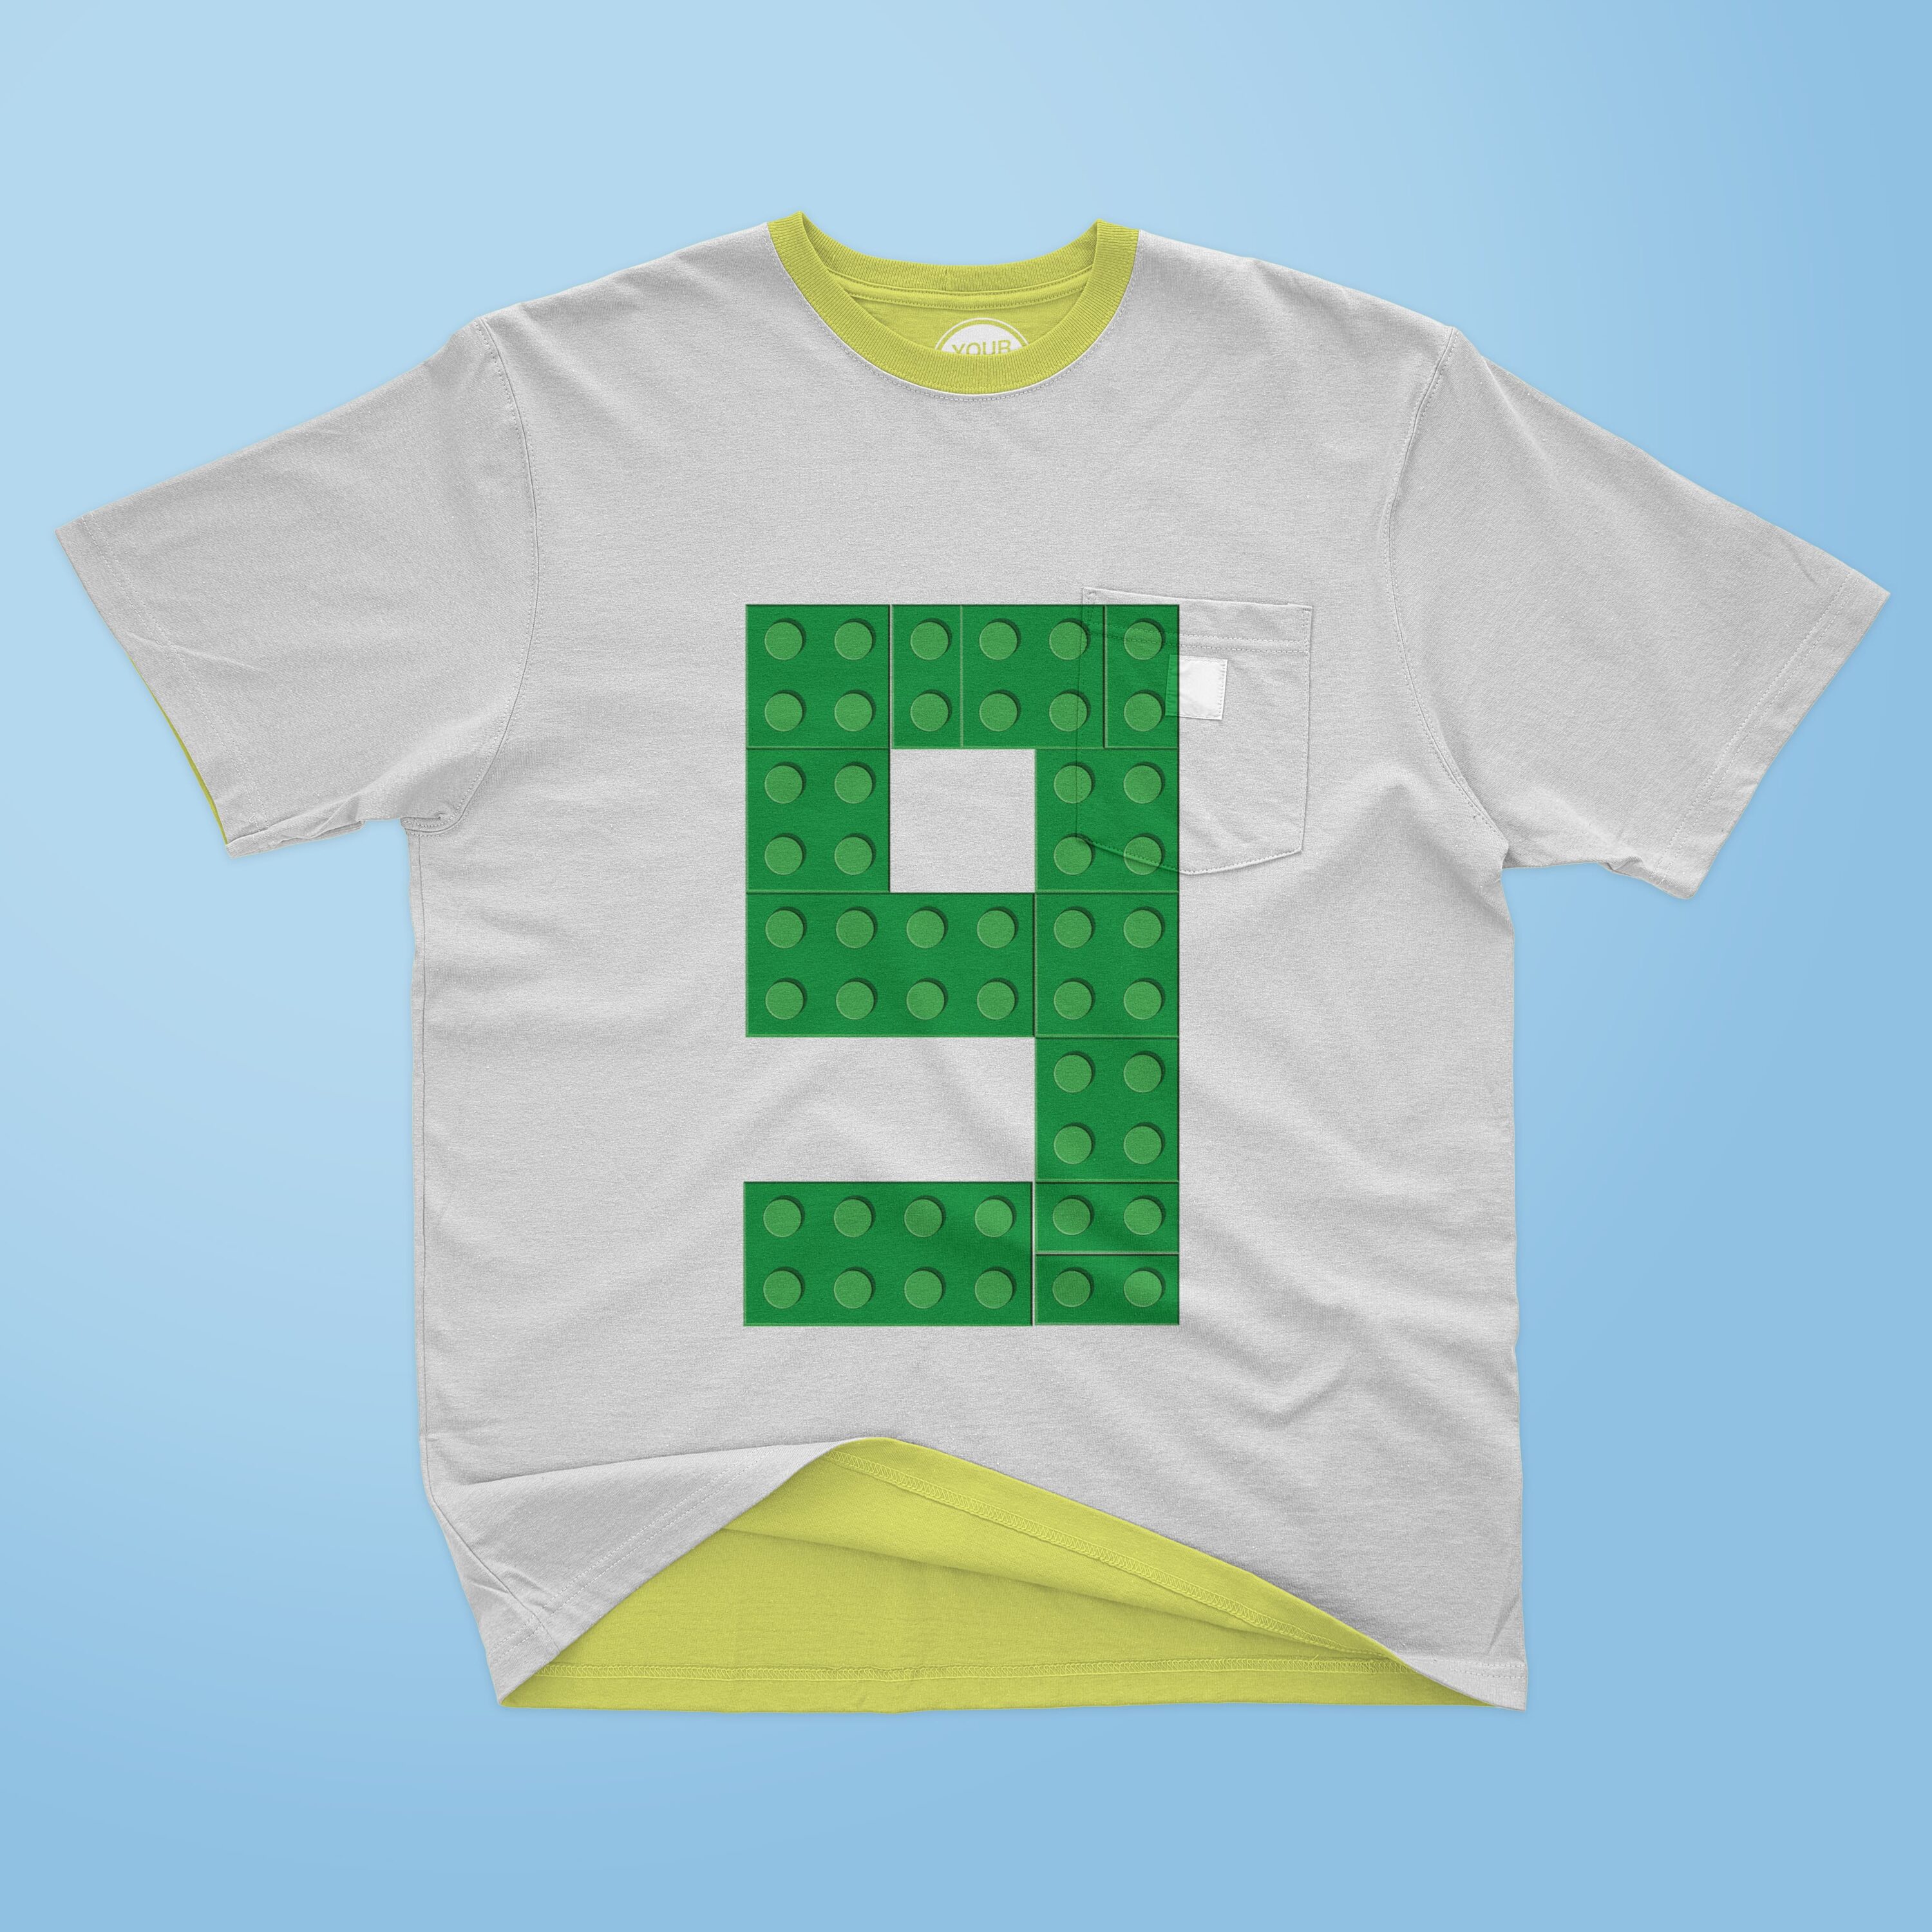 Number 9 made from green lego bricks - t-shirt design.